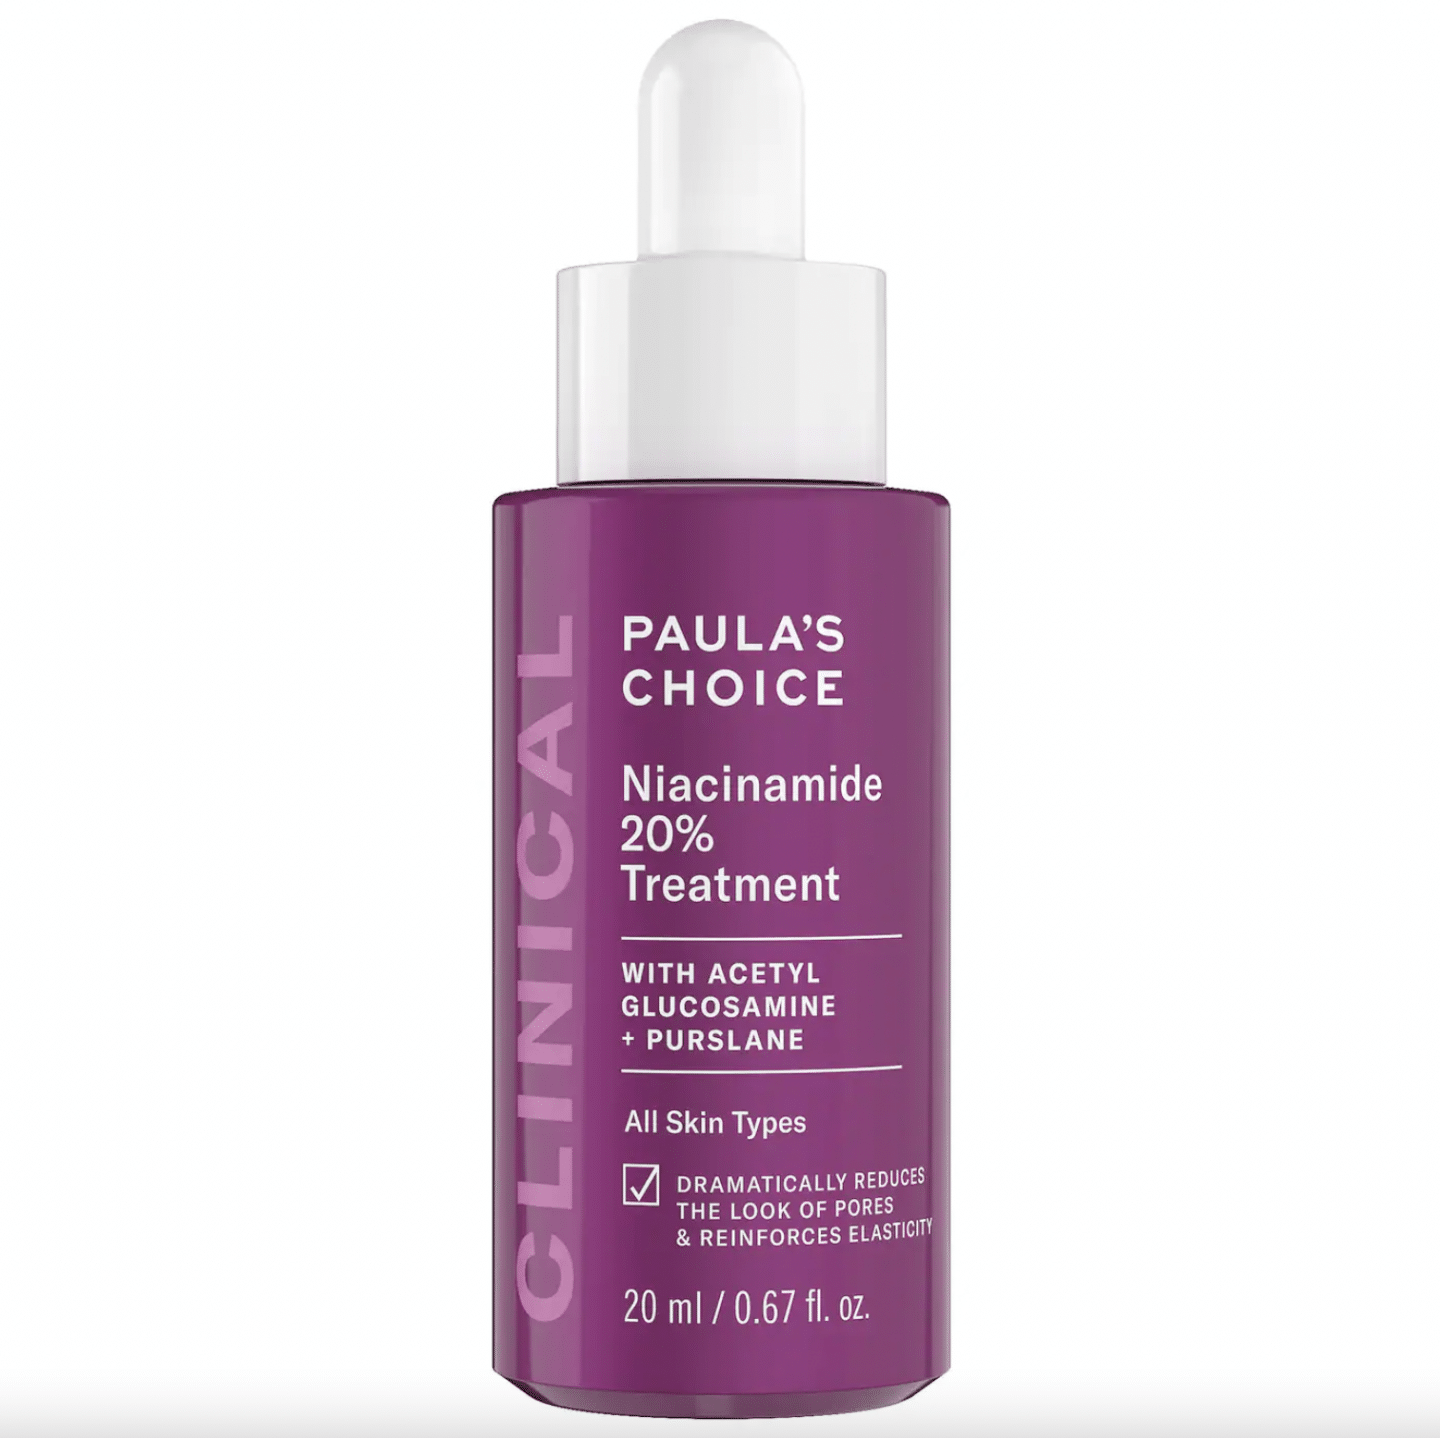 Niacinamide and Retinol, by Blogger What The Fab